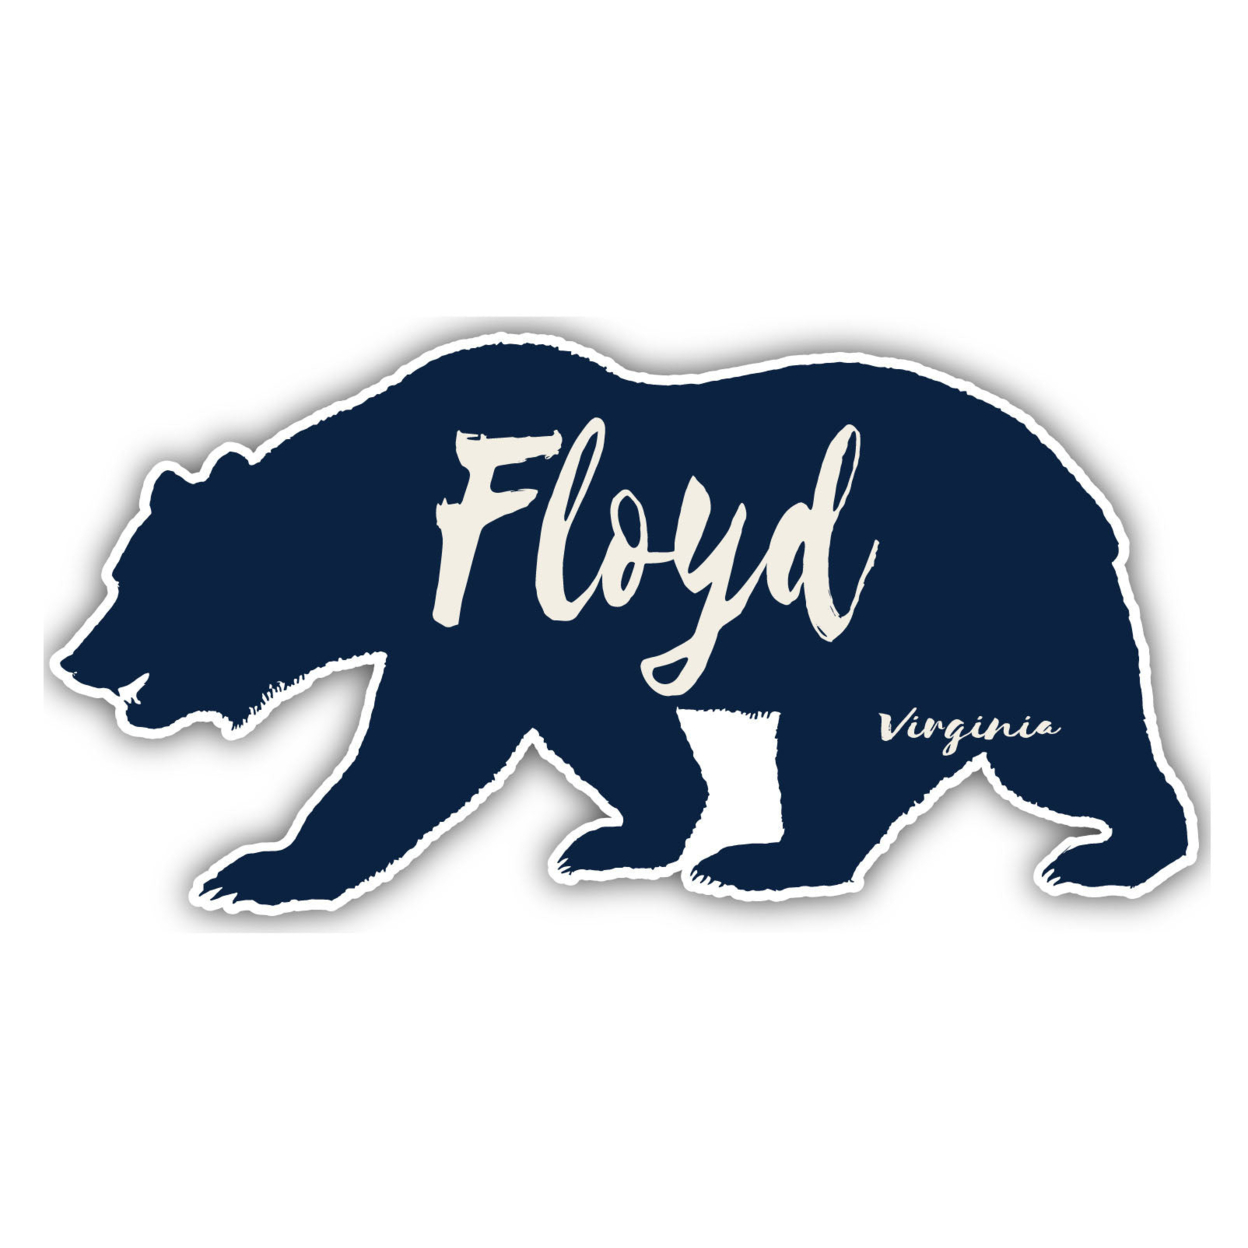 Floyd Virginia Souvenir Decorative Stickers (Choose Theme And Size) - 4-Pack, 4-Inch, Great Outdoors